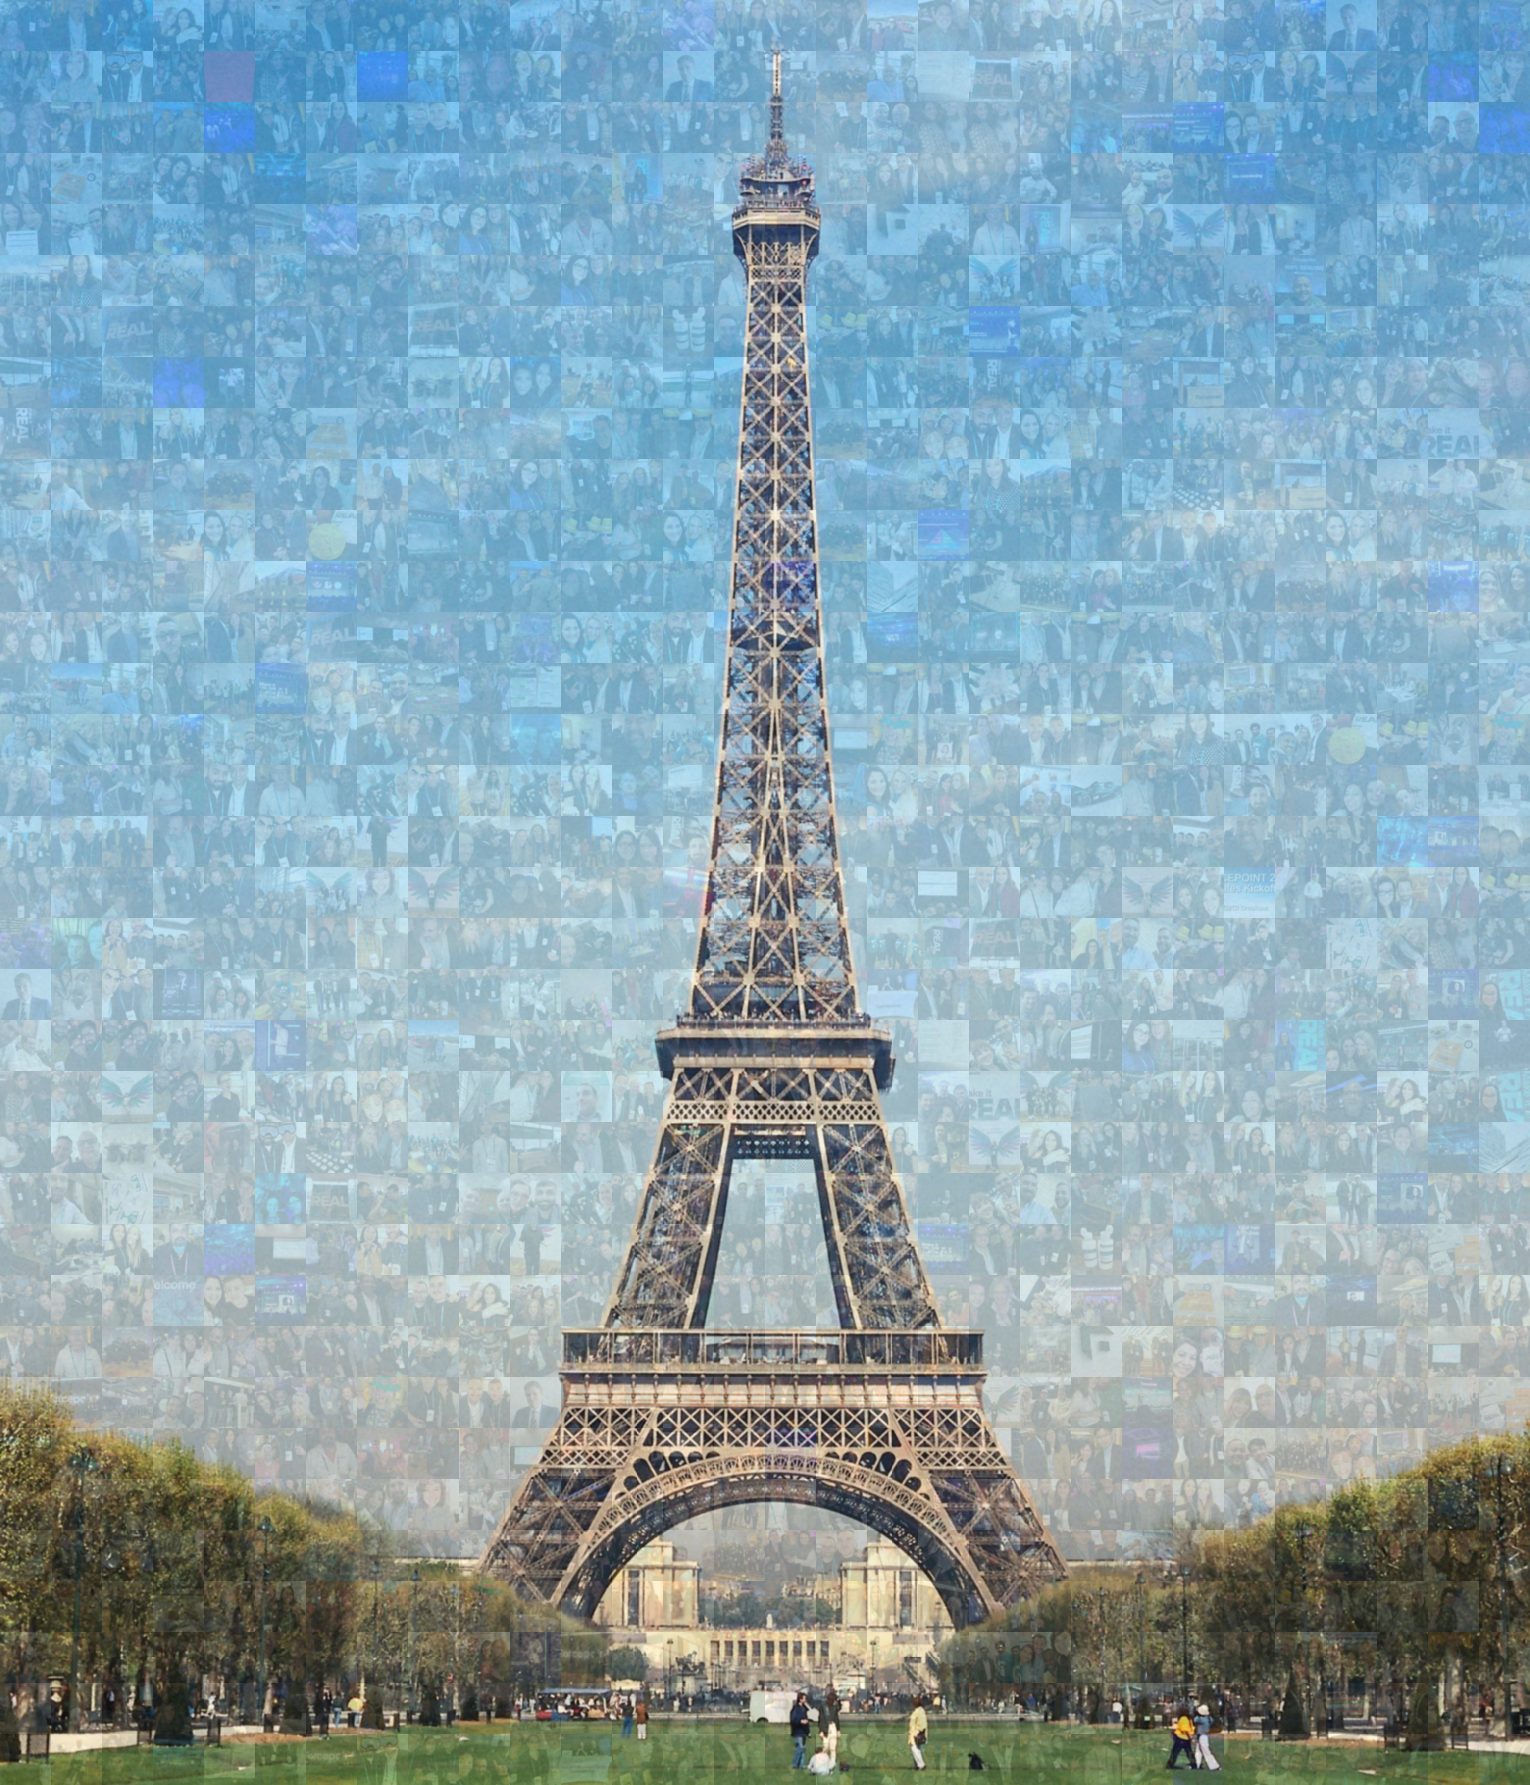 Mosaic_Completed_202003241846.png